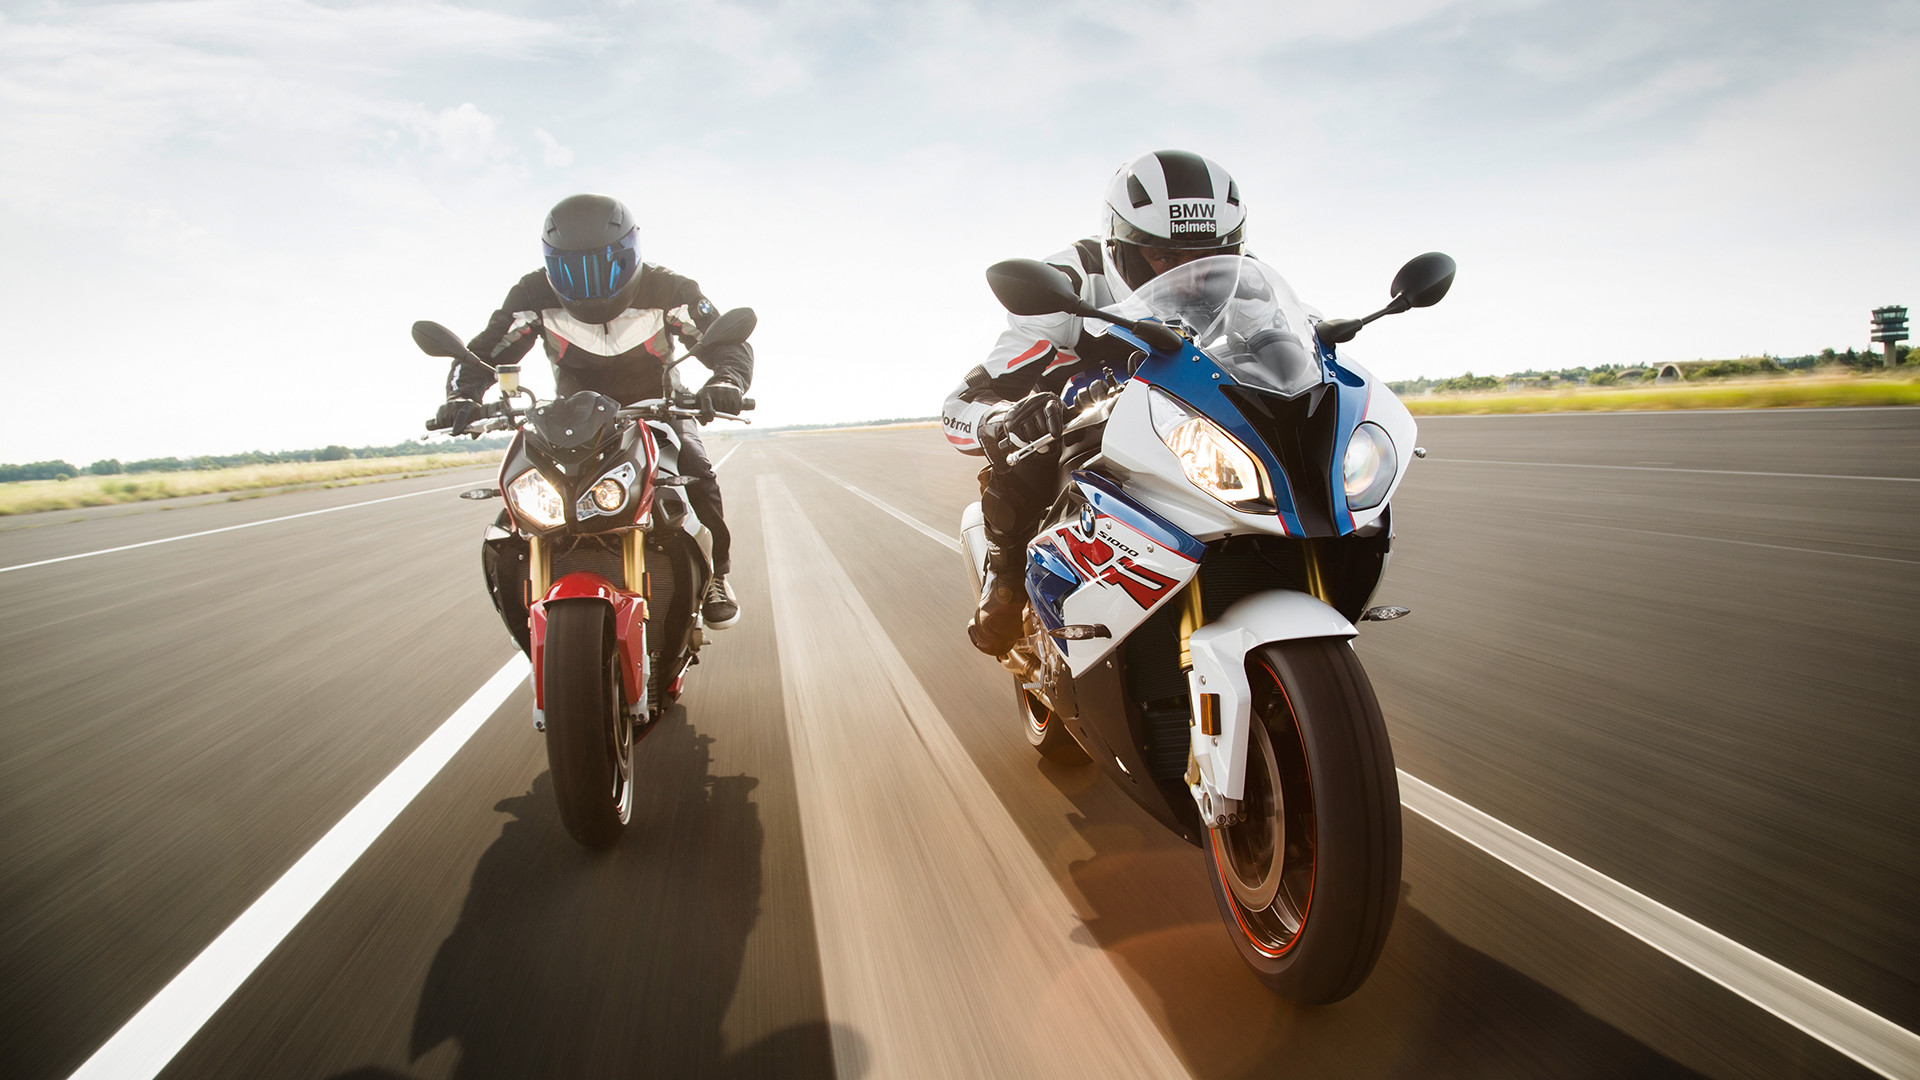 Bmw S1000rr Breaks World Speed Record Southern California Bmw Motorcycles